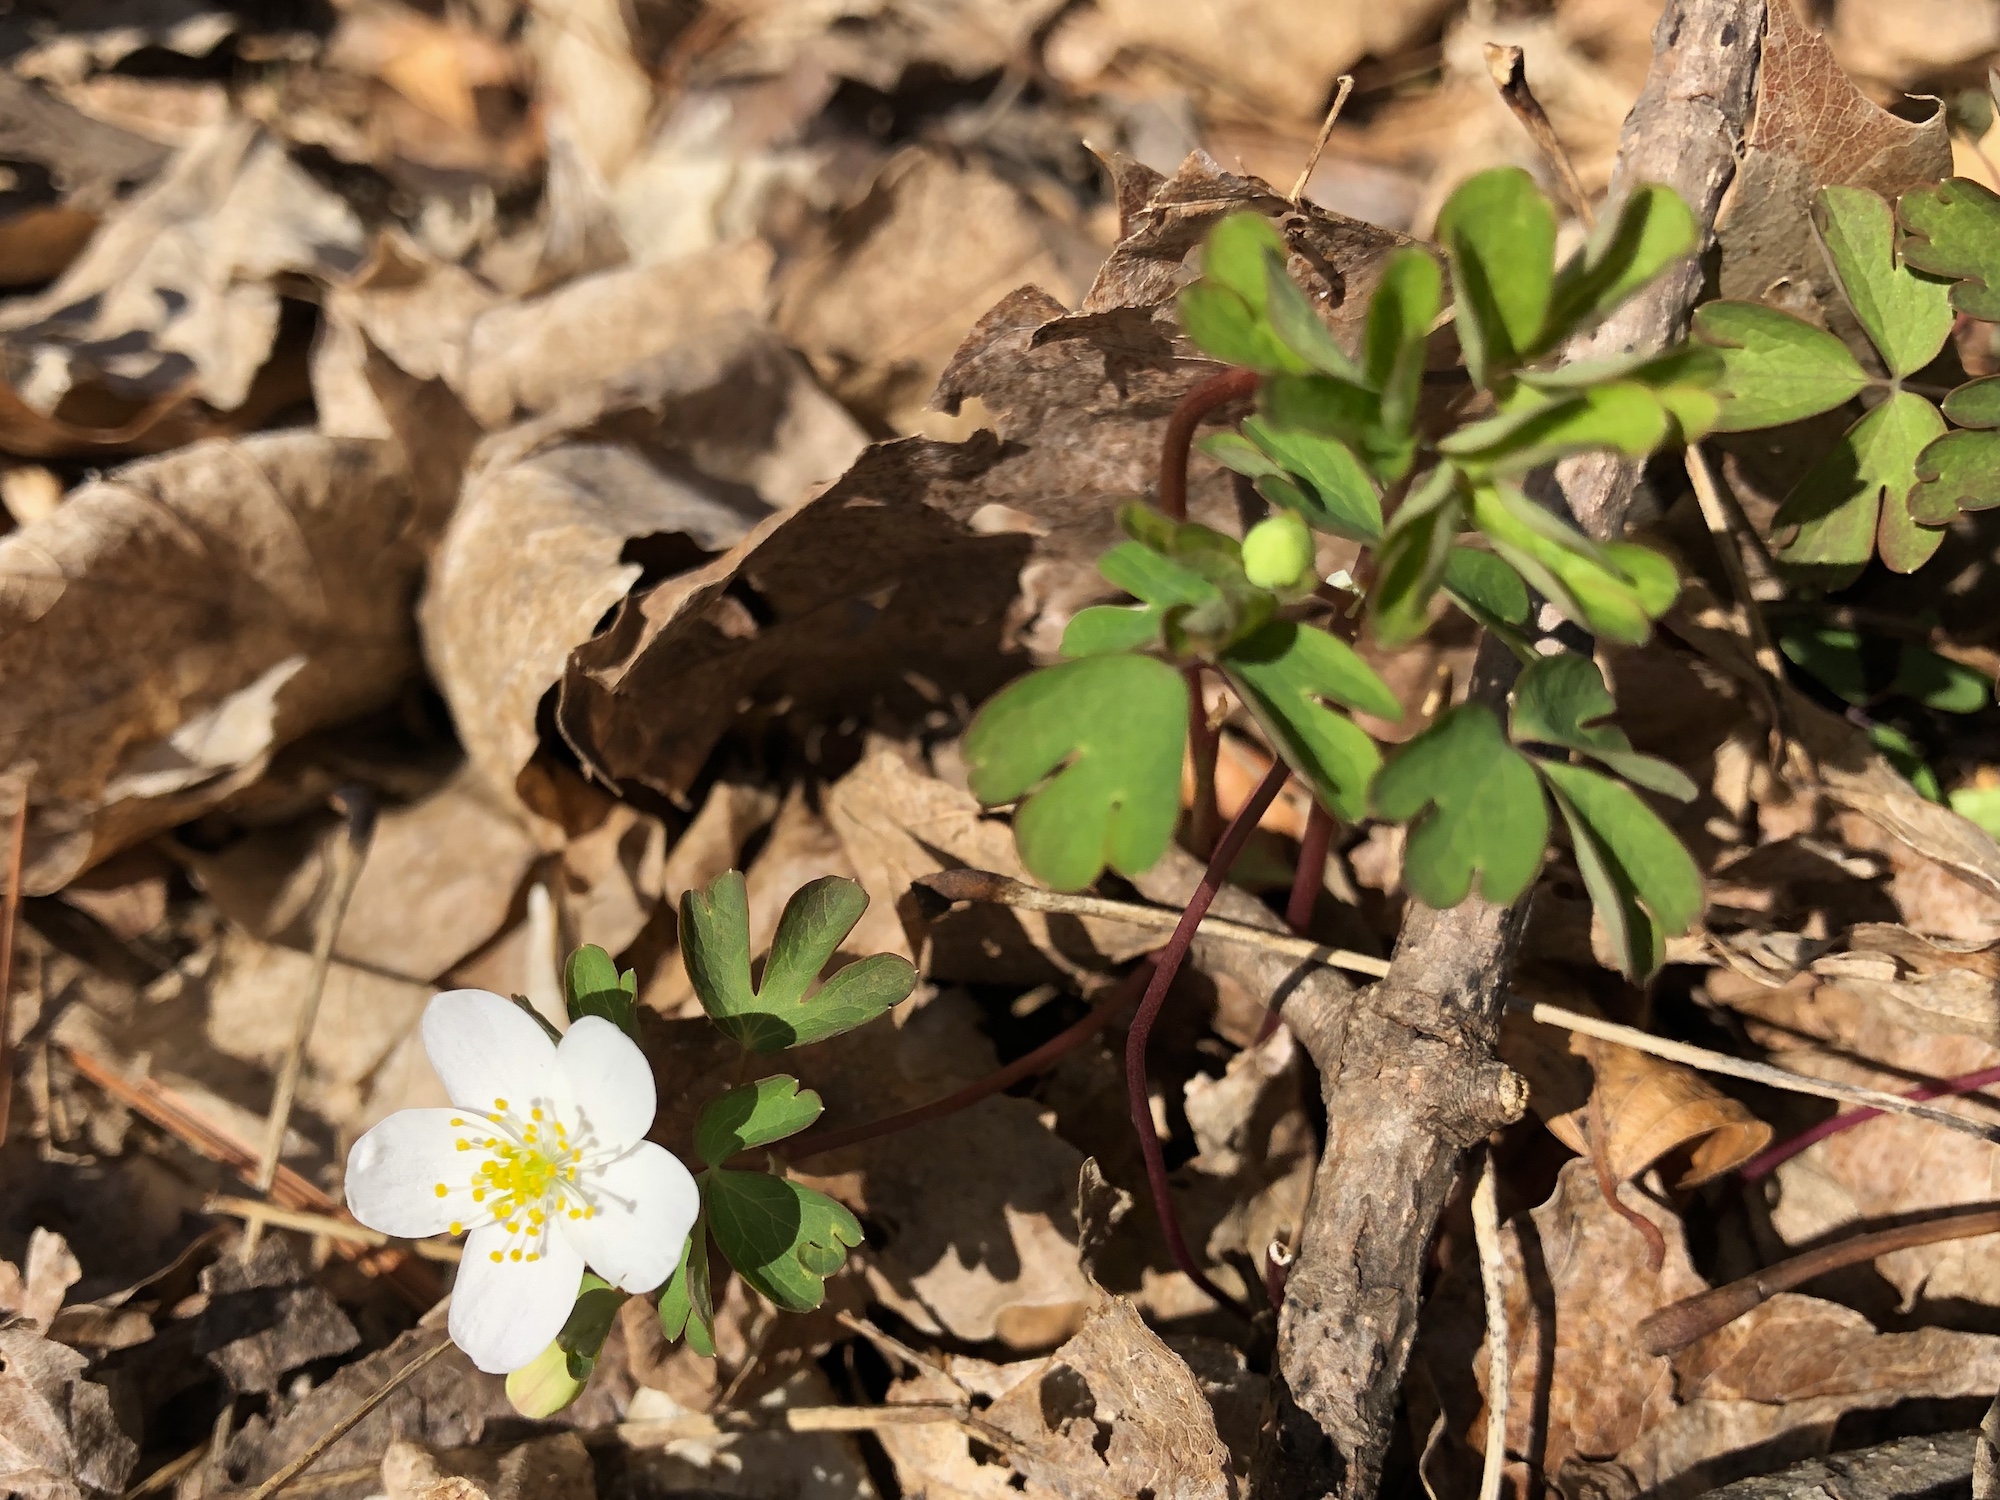 False Rue Anemone in the Maple-Basswood Forest of the University of Wisconsin Arboretum in Madison, Wisconsin on April 28, 2020.